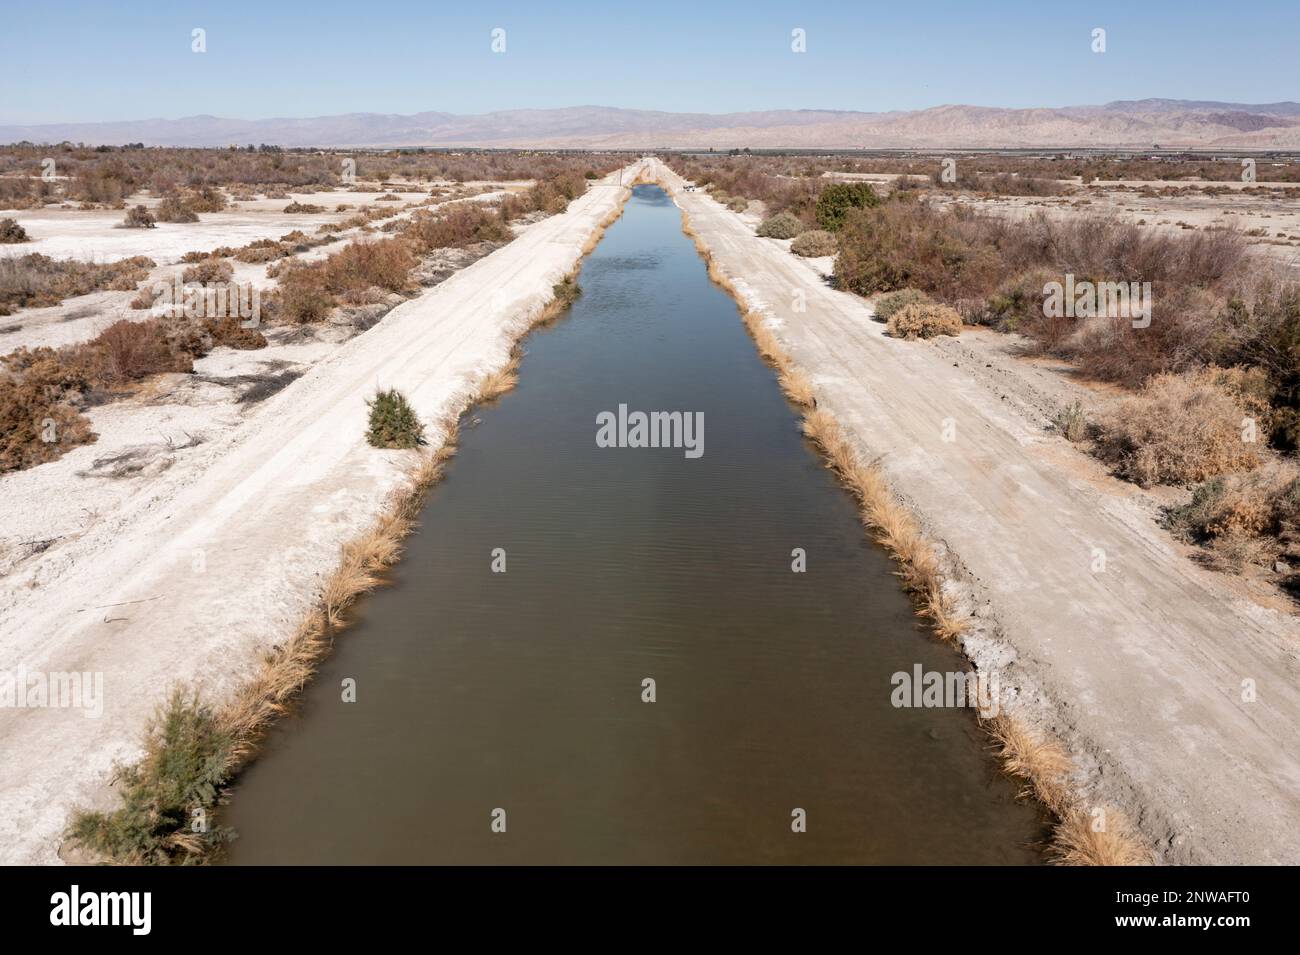 A canal carries fertilizer-laden agricultural runoff from farms in the Coachella Valley to the Salton Sea, a dying lake in southeastern California. Stock Photo